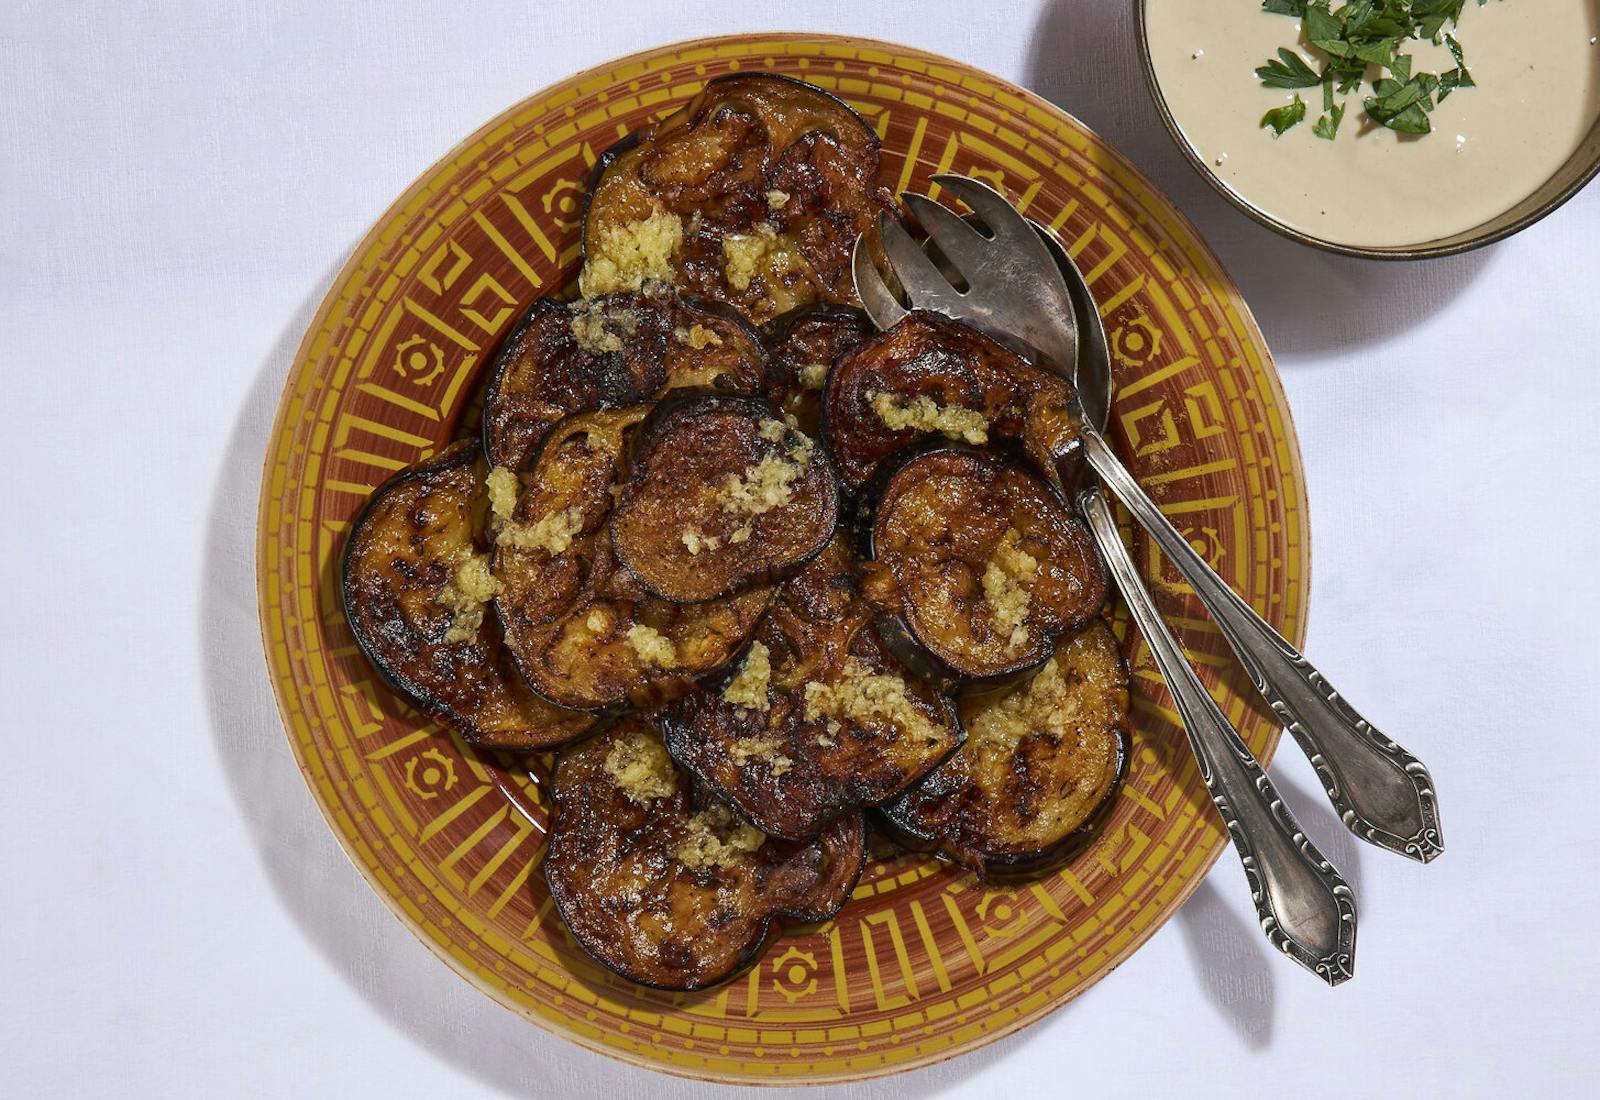 Fried eggplant slices sprinkled with garlic and cumin, side of tahini with parsley.